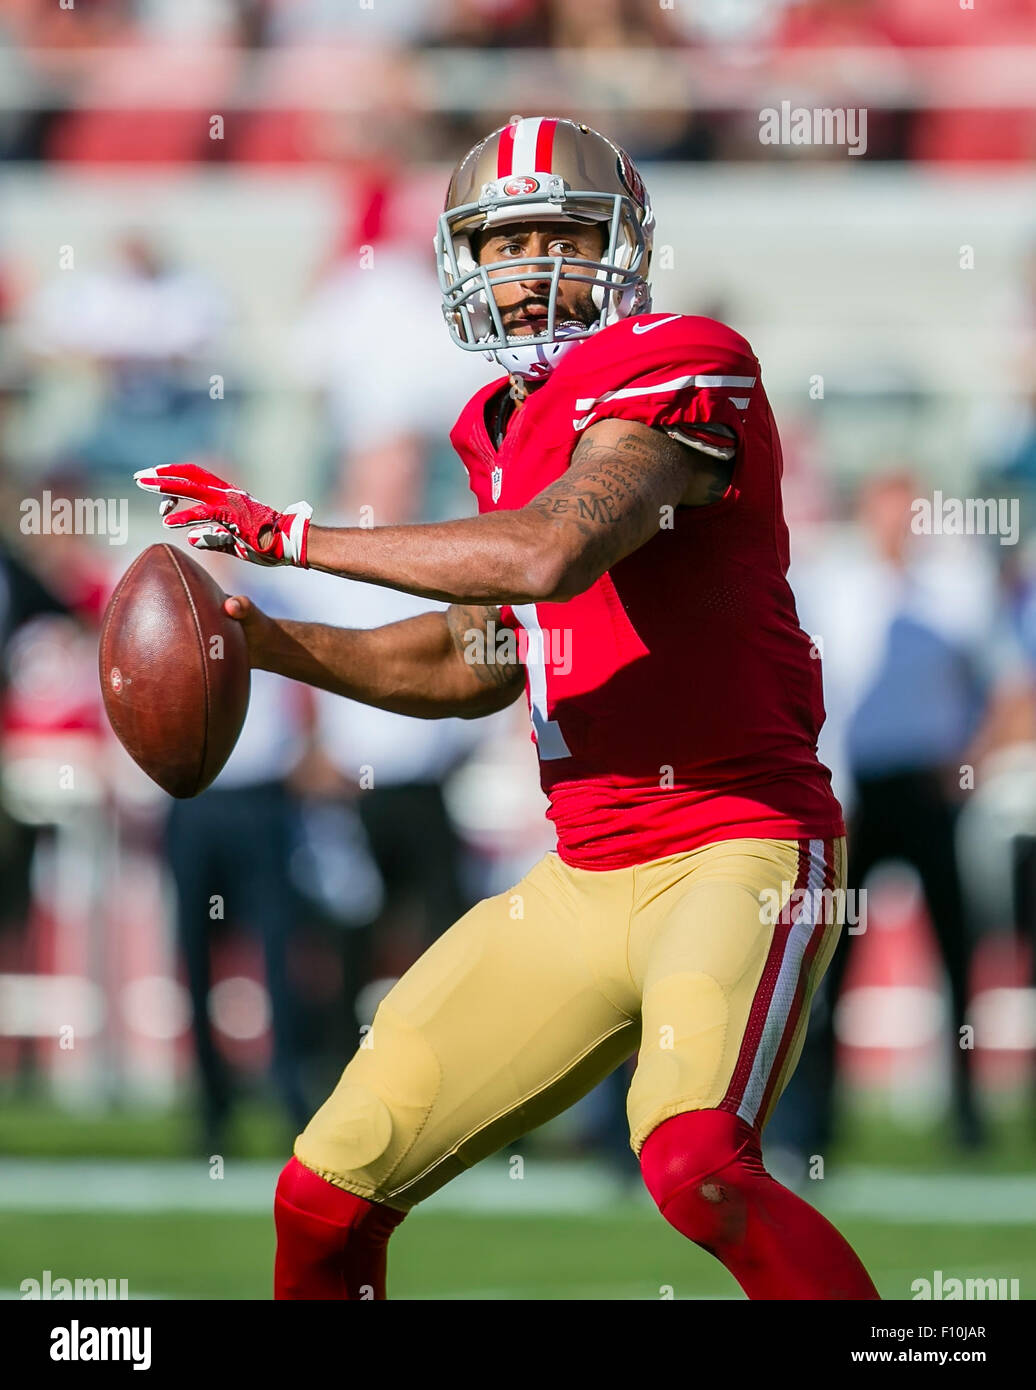 Halftime. 23rd Aug, 2015. San Francisco 49ers quarterback Colin Kaepernick  (7) in action during the NFL football game between the Dallas Cowboys and  the San Francisco 49ers at Levi's Stadium in Santa